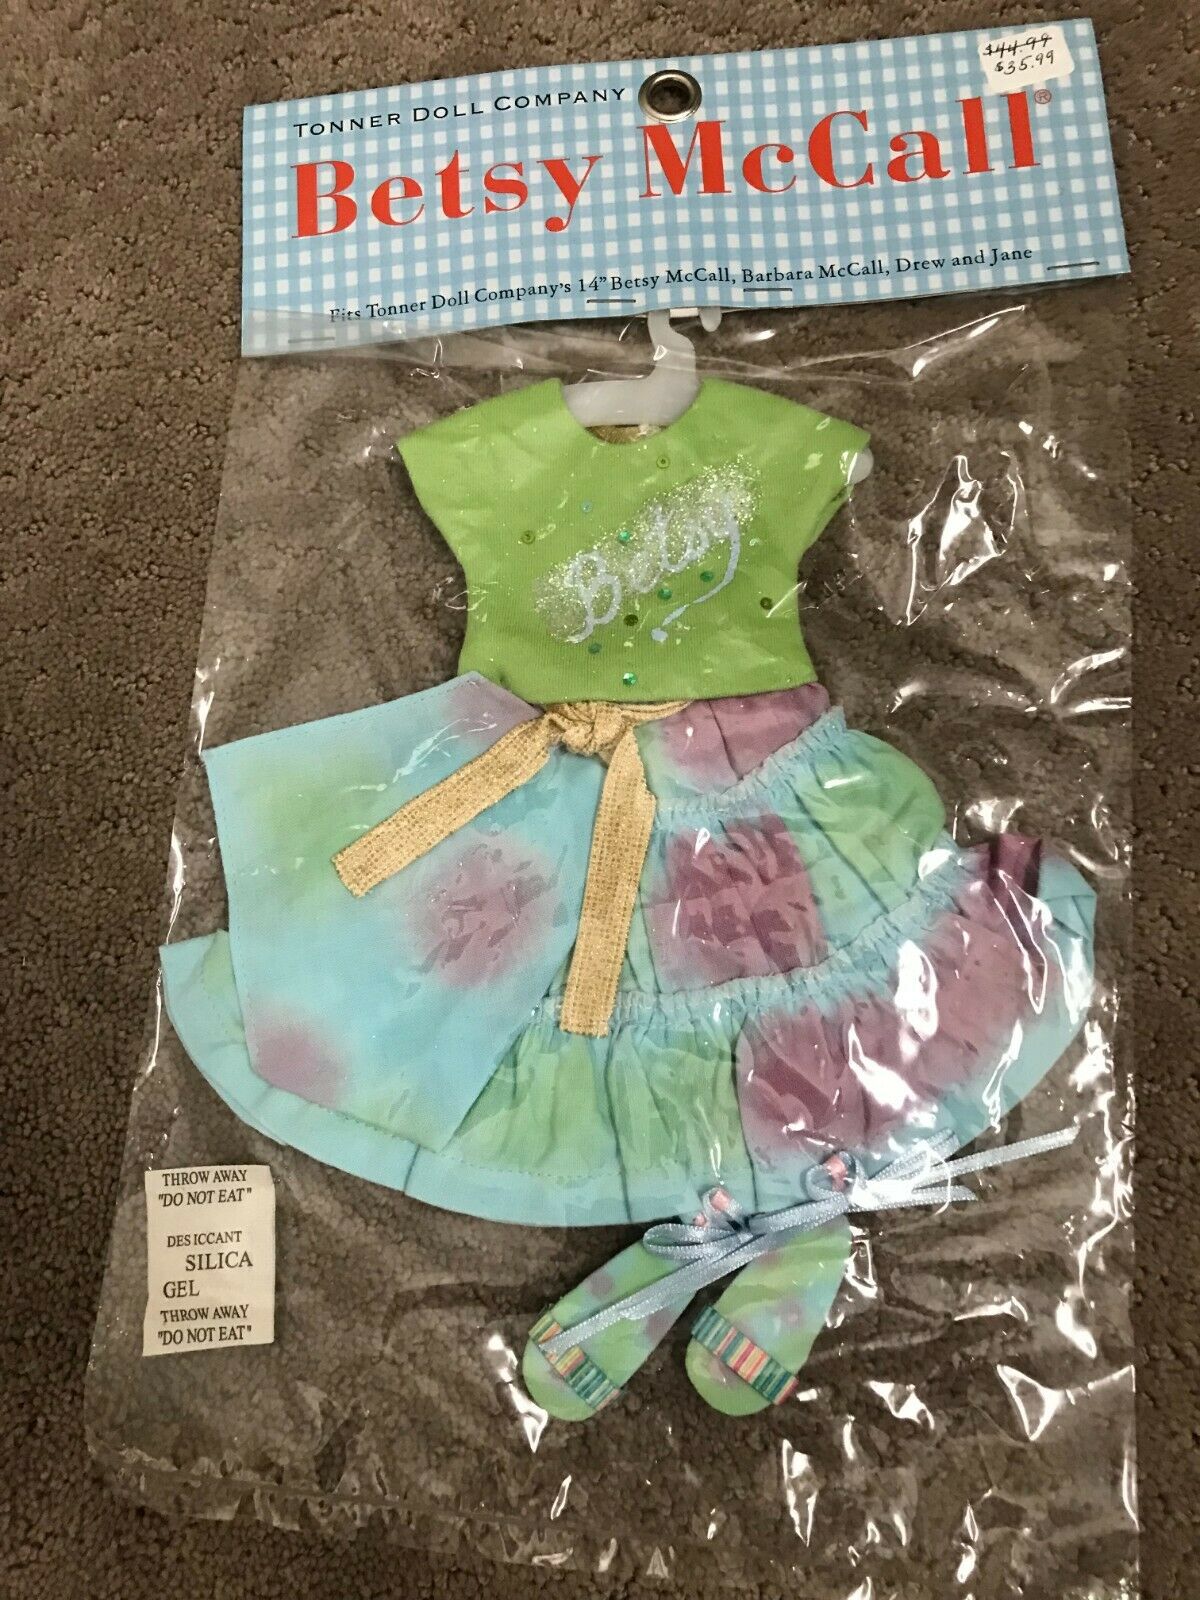 Betsy Mccall 14" Tonner Doll Smart Art Outfit